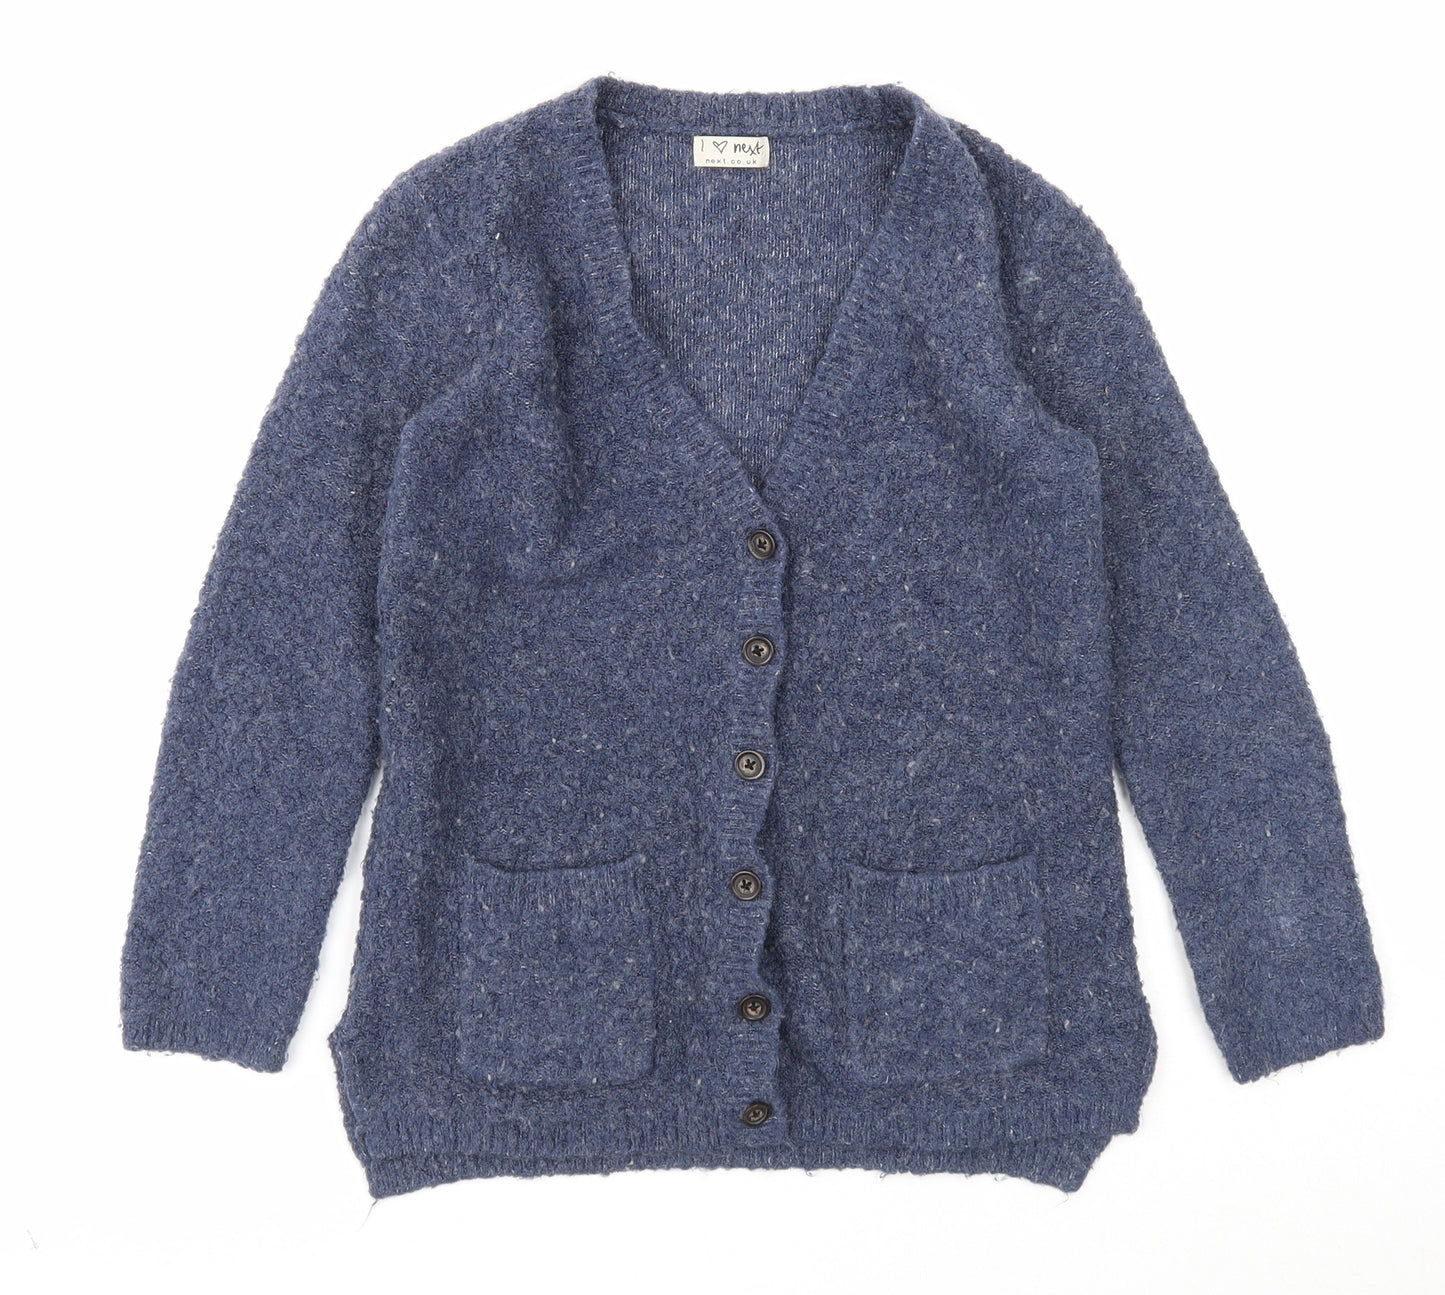 NEXT Girls Blue V-Neck Acrylic Cardigan Jumper Size 8 Years Button